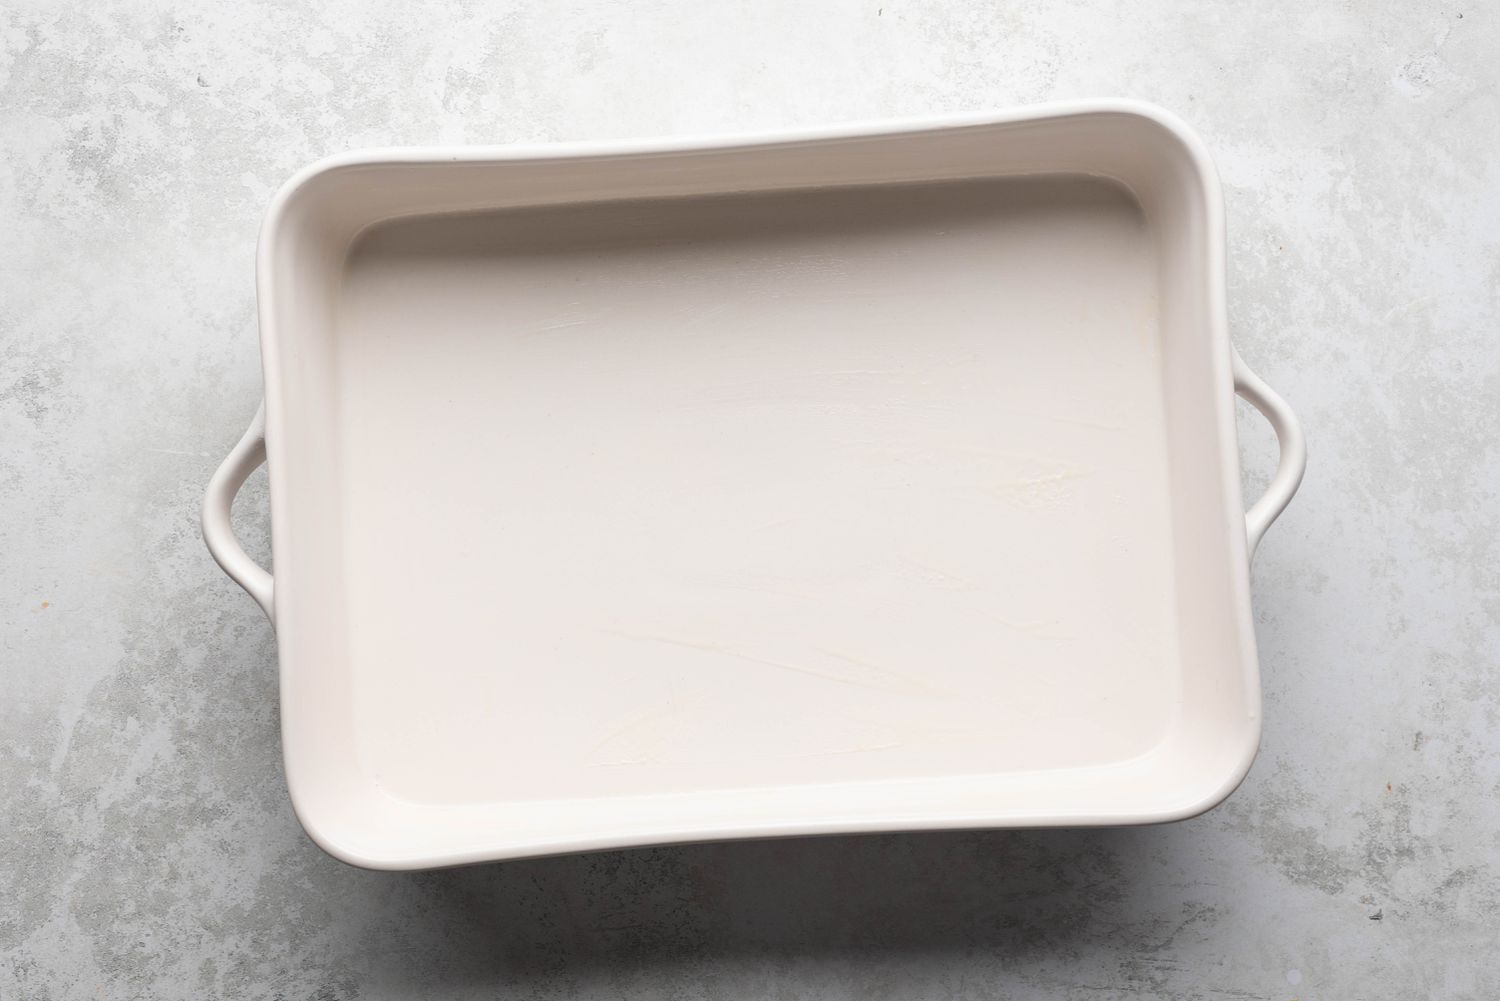 Buttered baking dish 